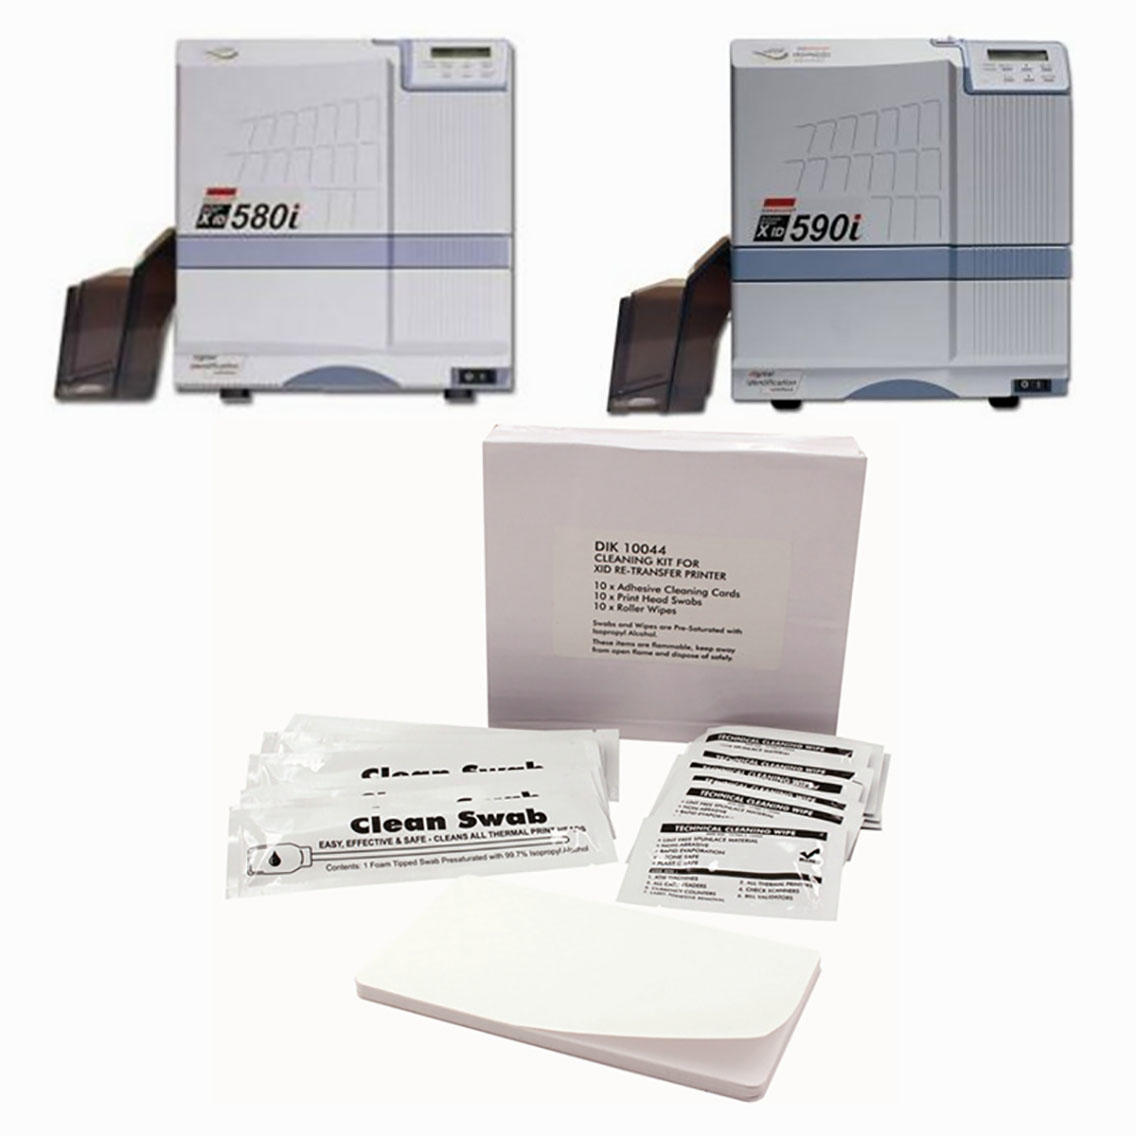 Cleanmo Non Woven inkjet printhead cleaning kit factory for card printer